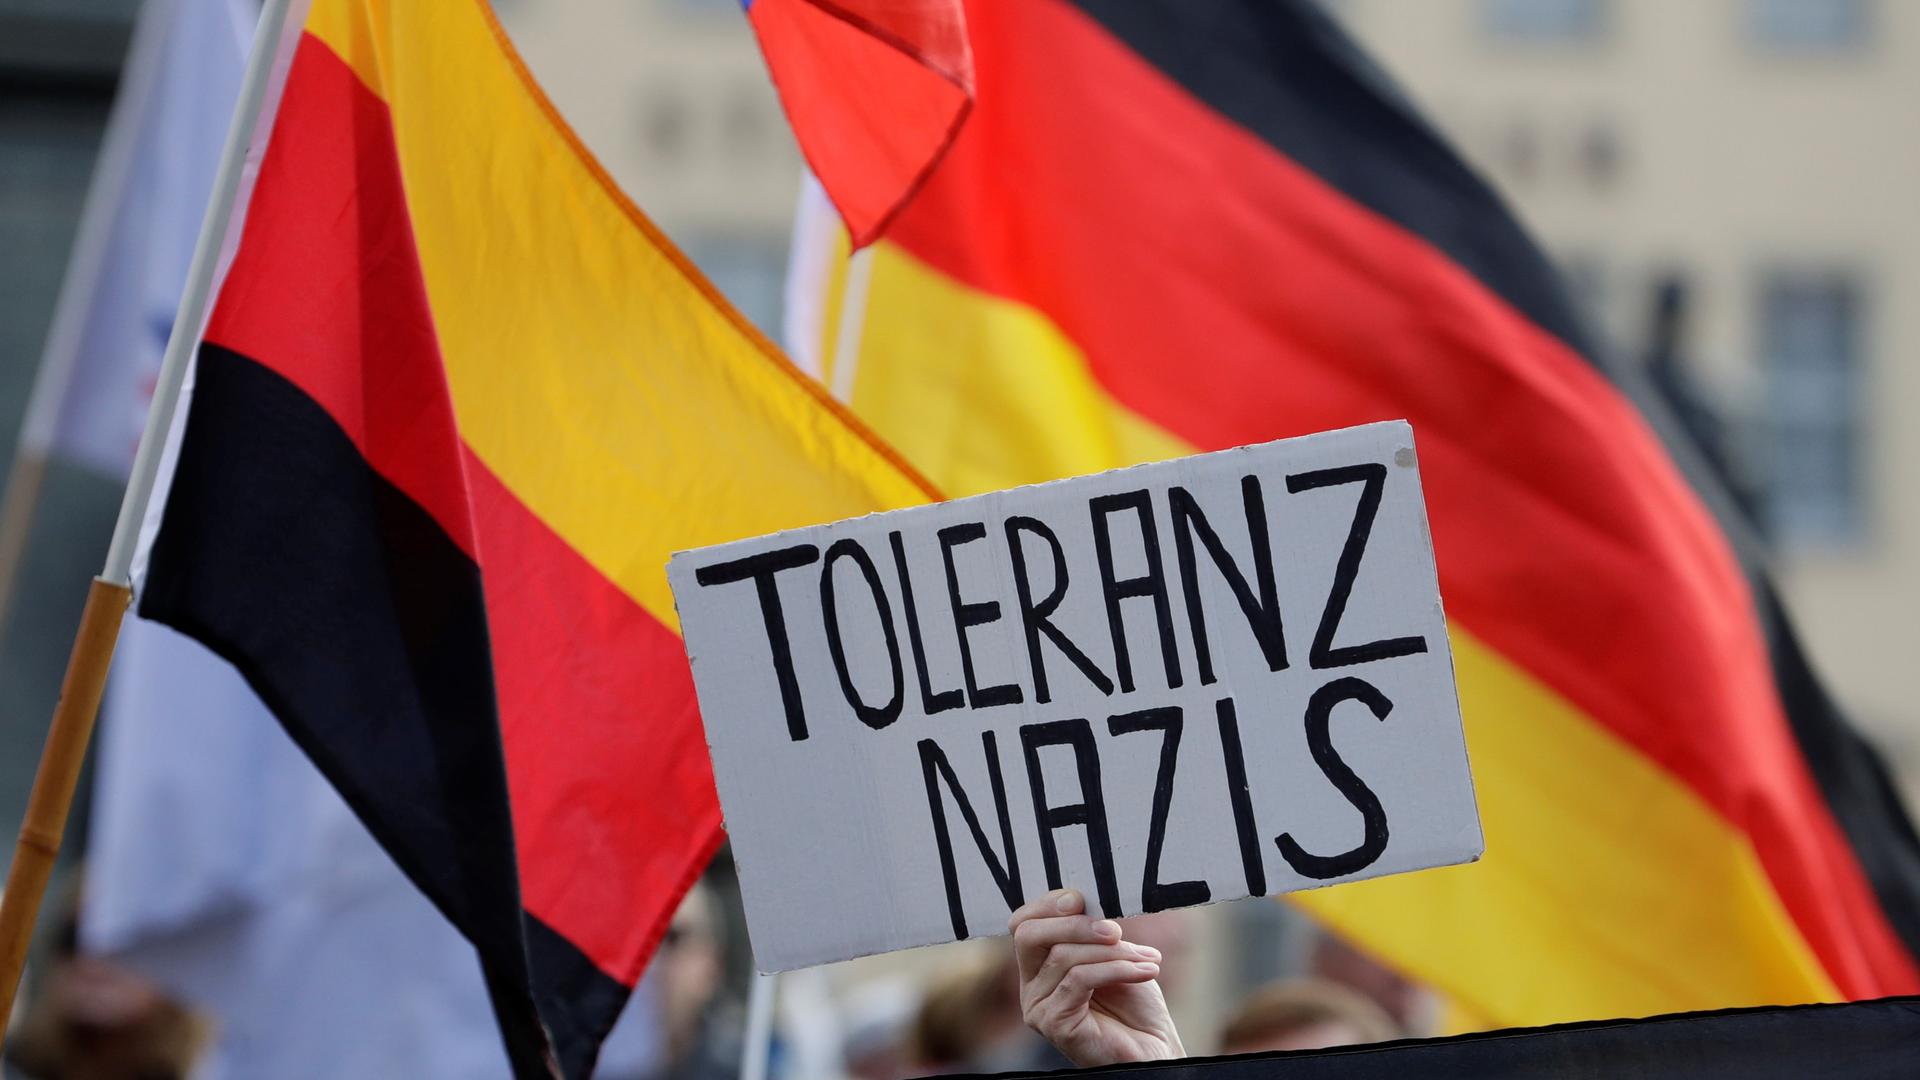 a German flag waves and a protester holds up a sign that says "tolerance Nazi"